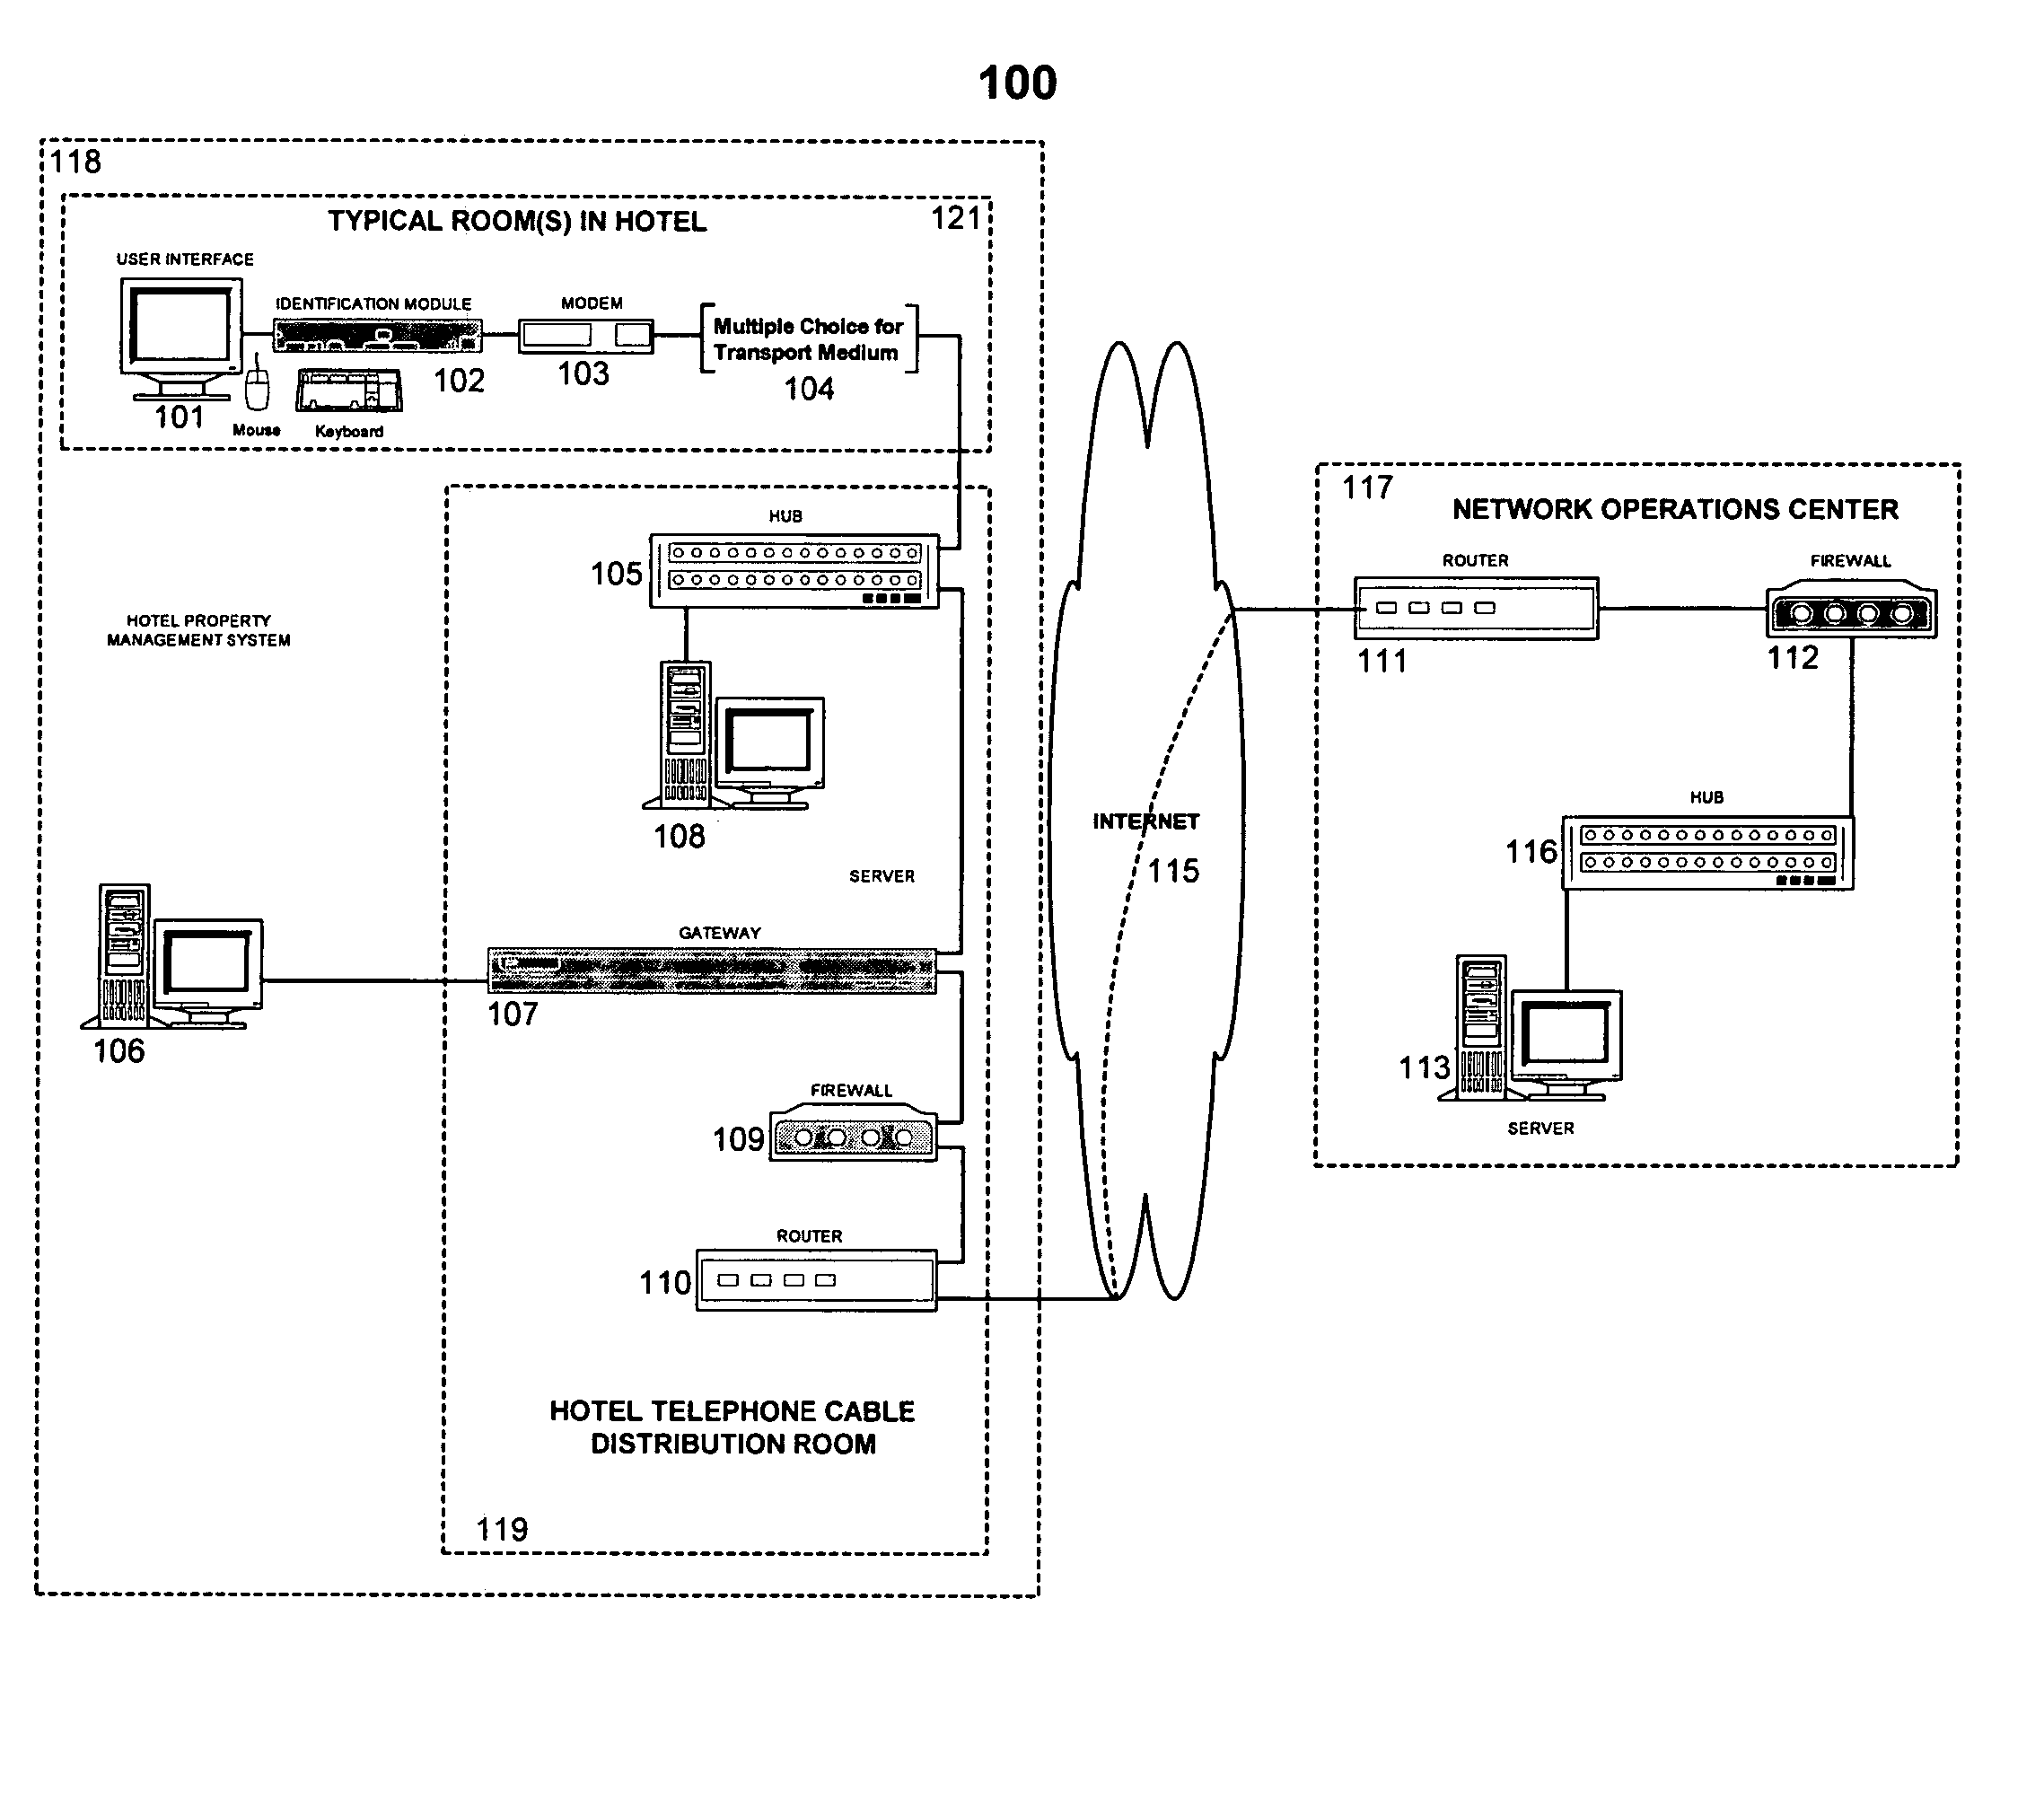 System and method for providing services across a network